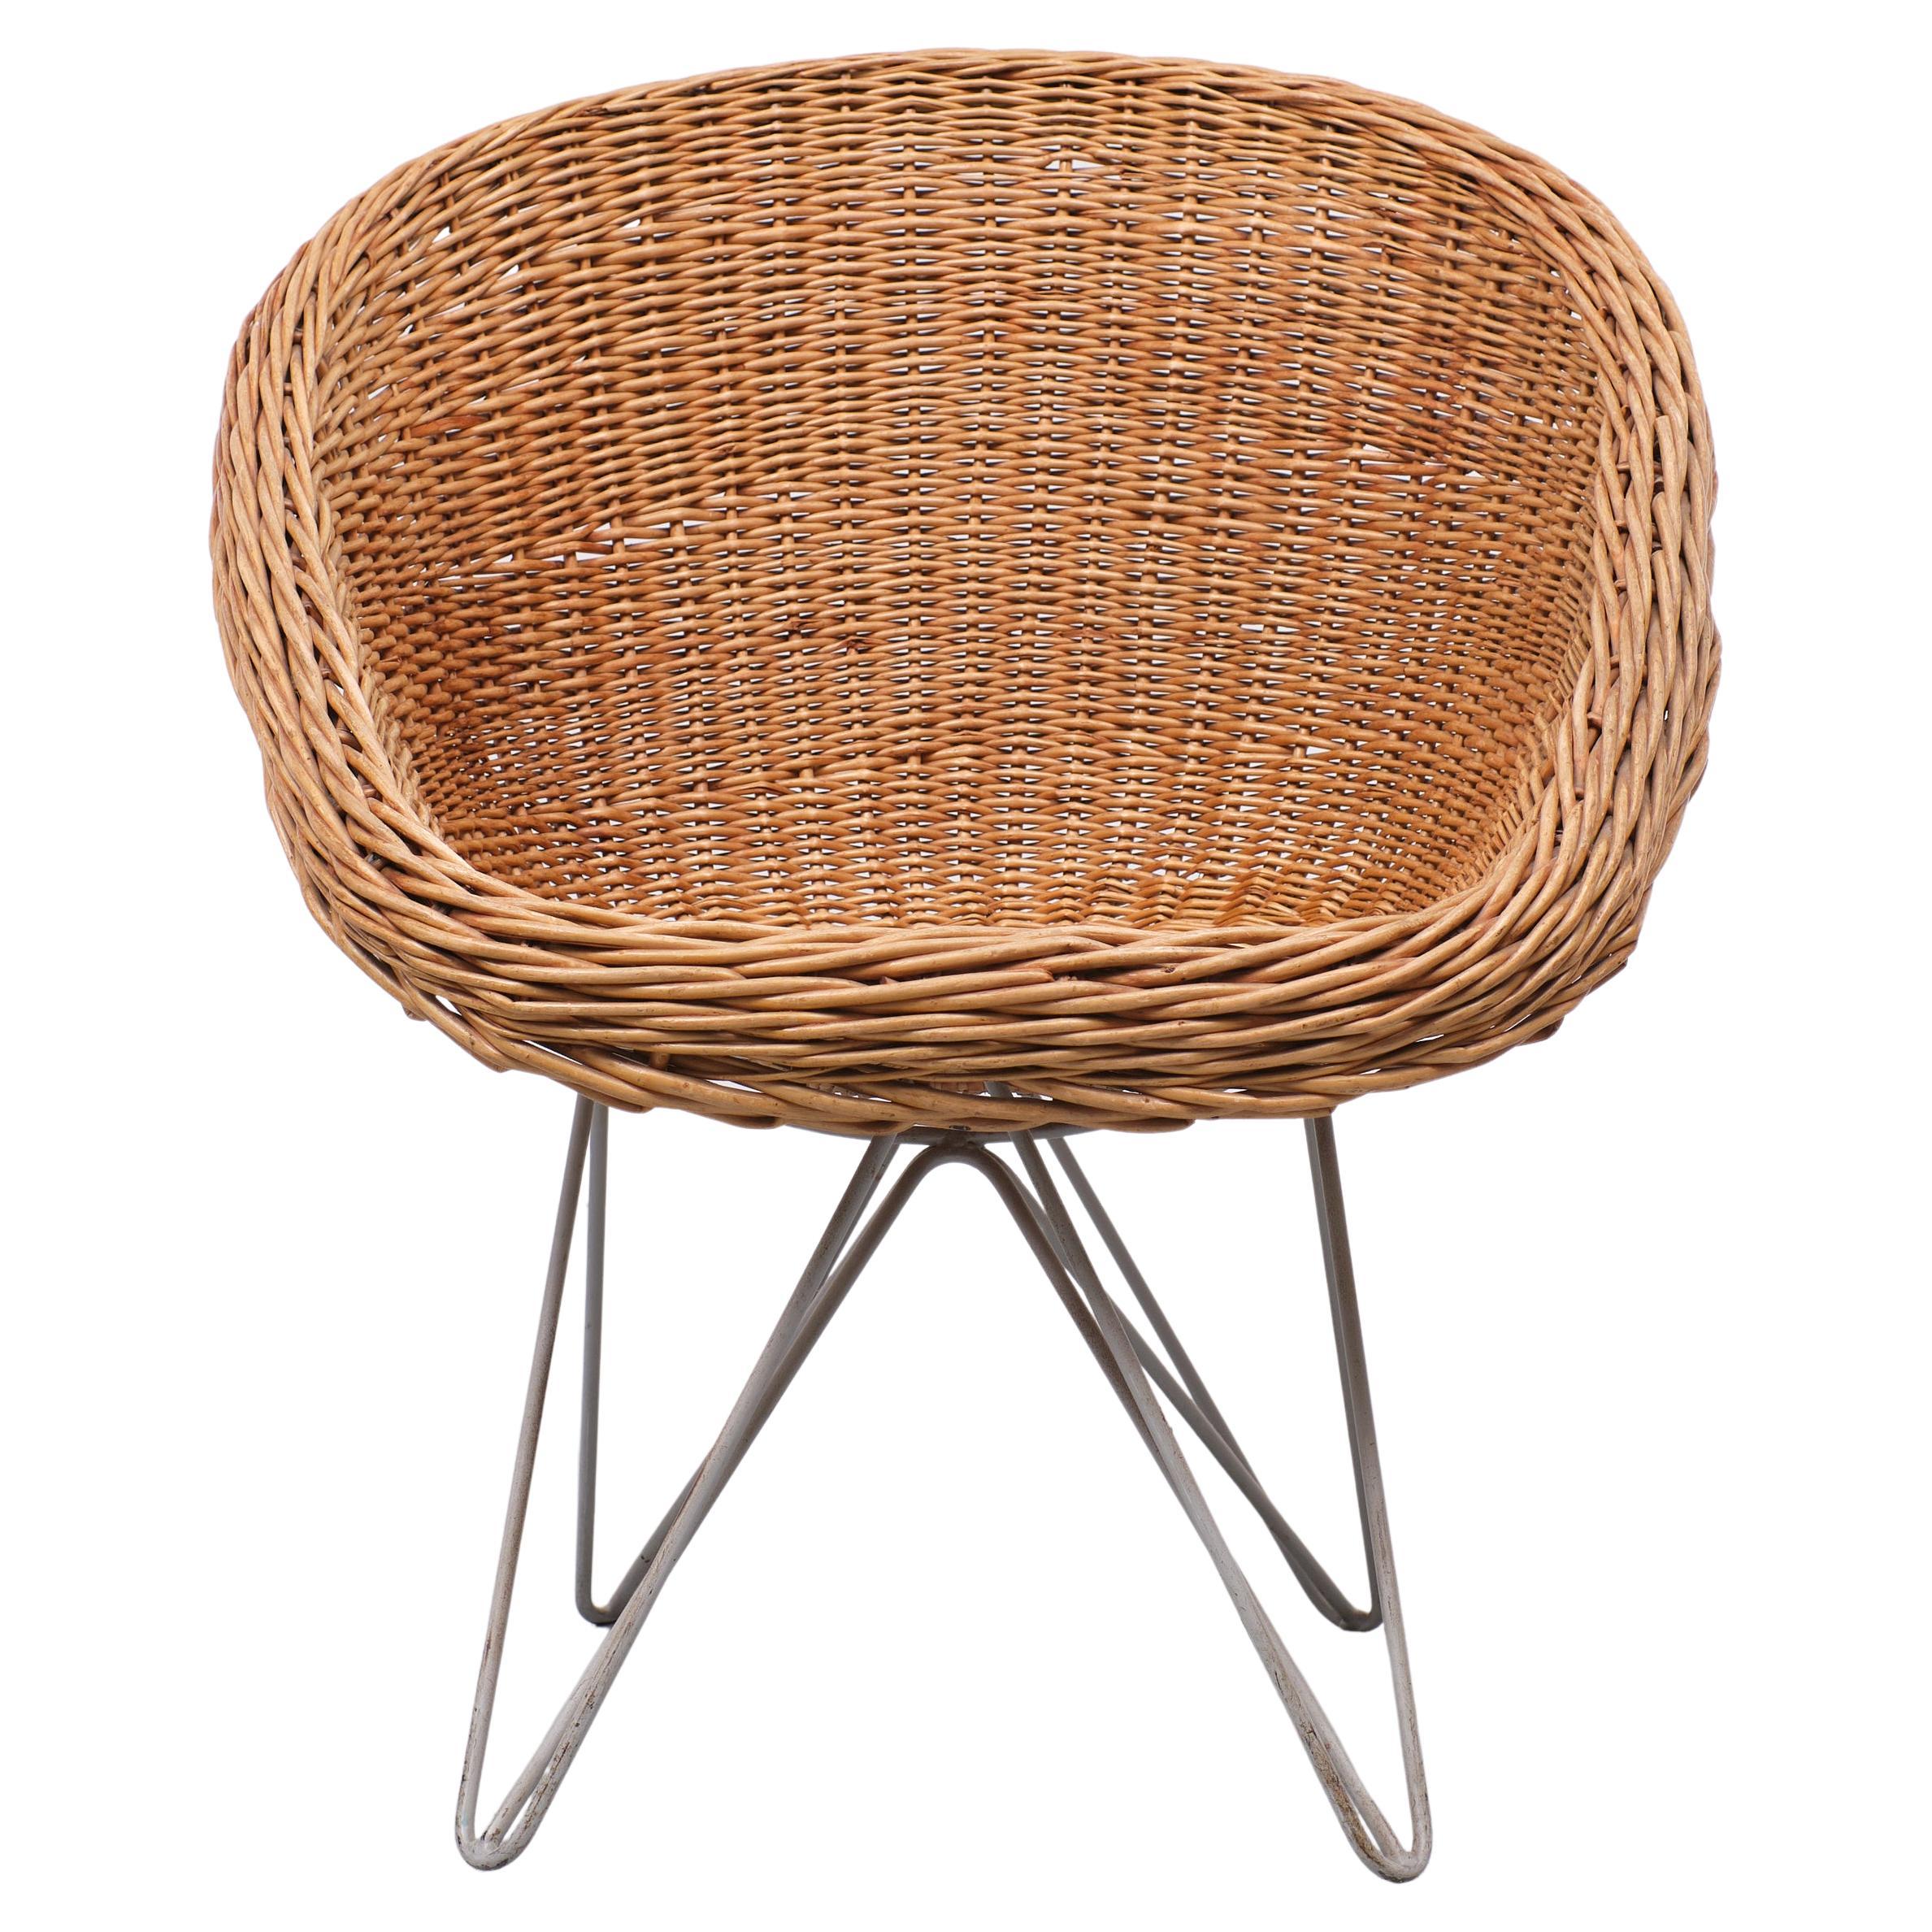 Very nice and rare Wicker chair .Design by Teun Velthuizen for Urotan 1950s Holland Grey Metal wire base ,comes with a Wicker seat .What a great looking chair this is